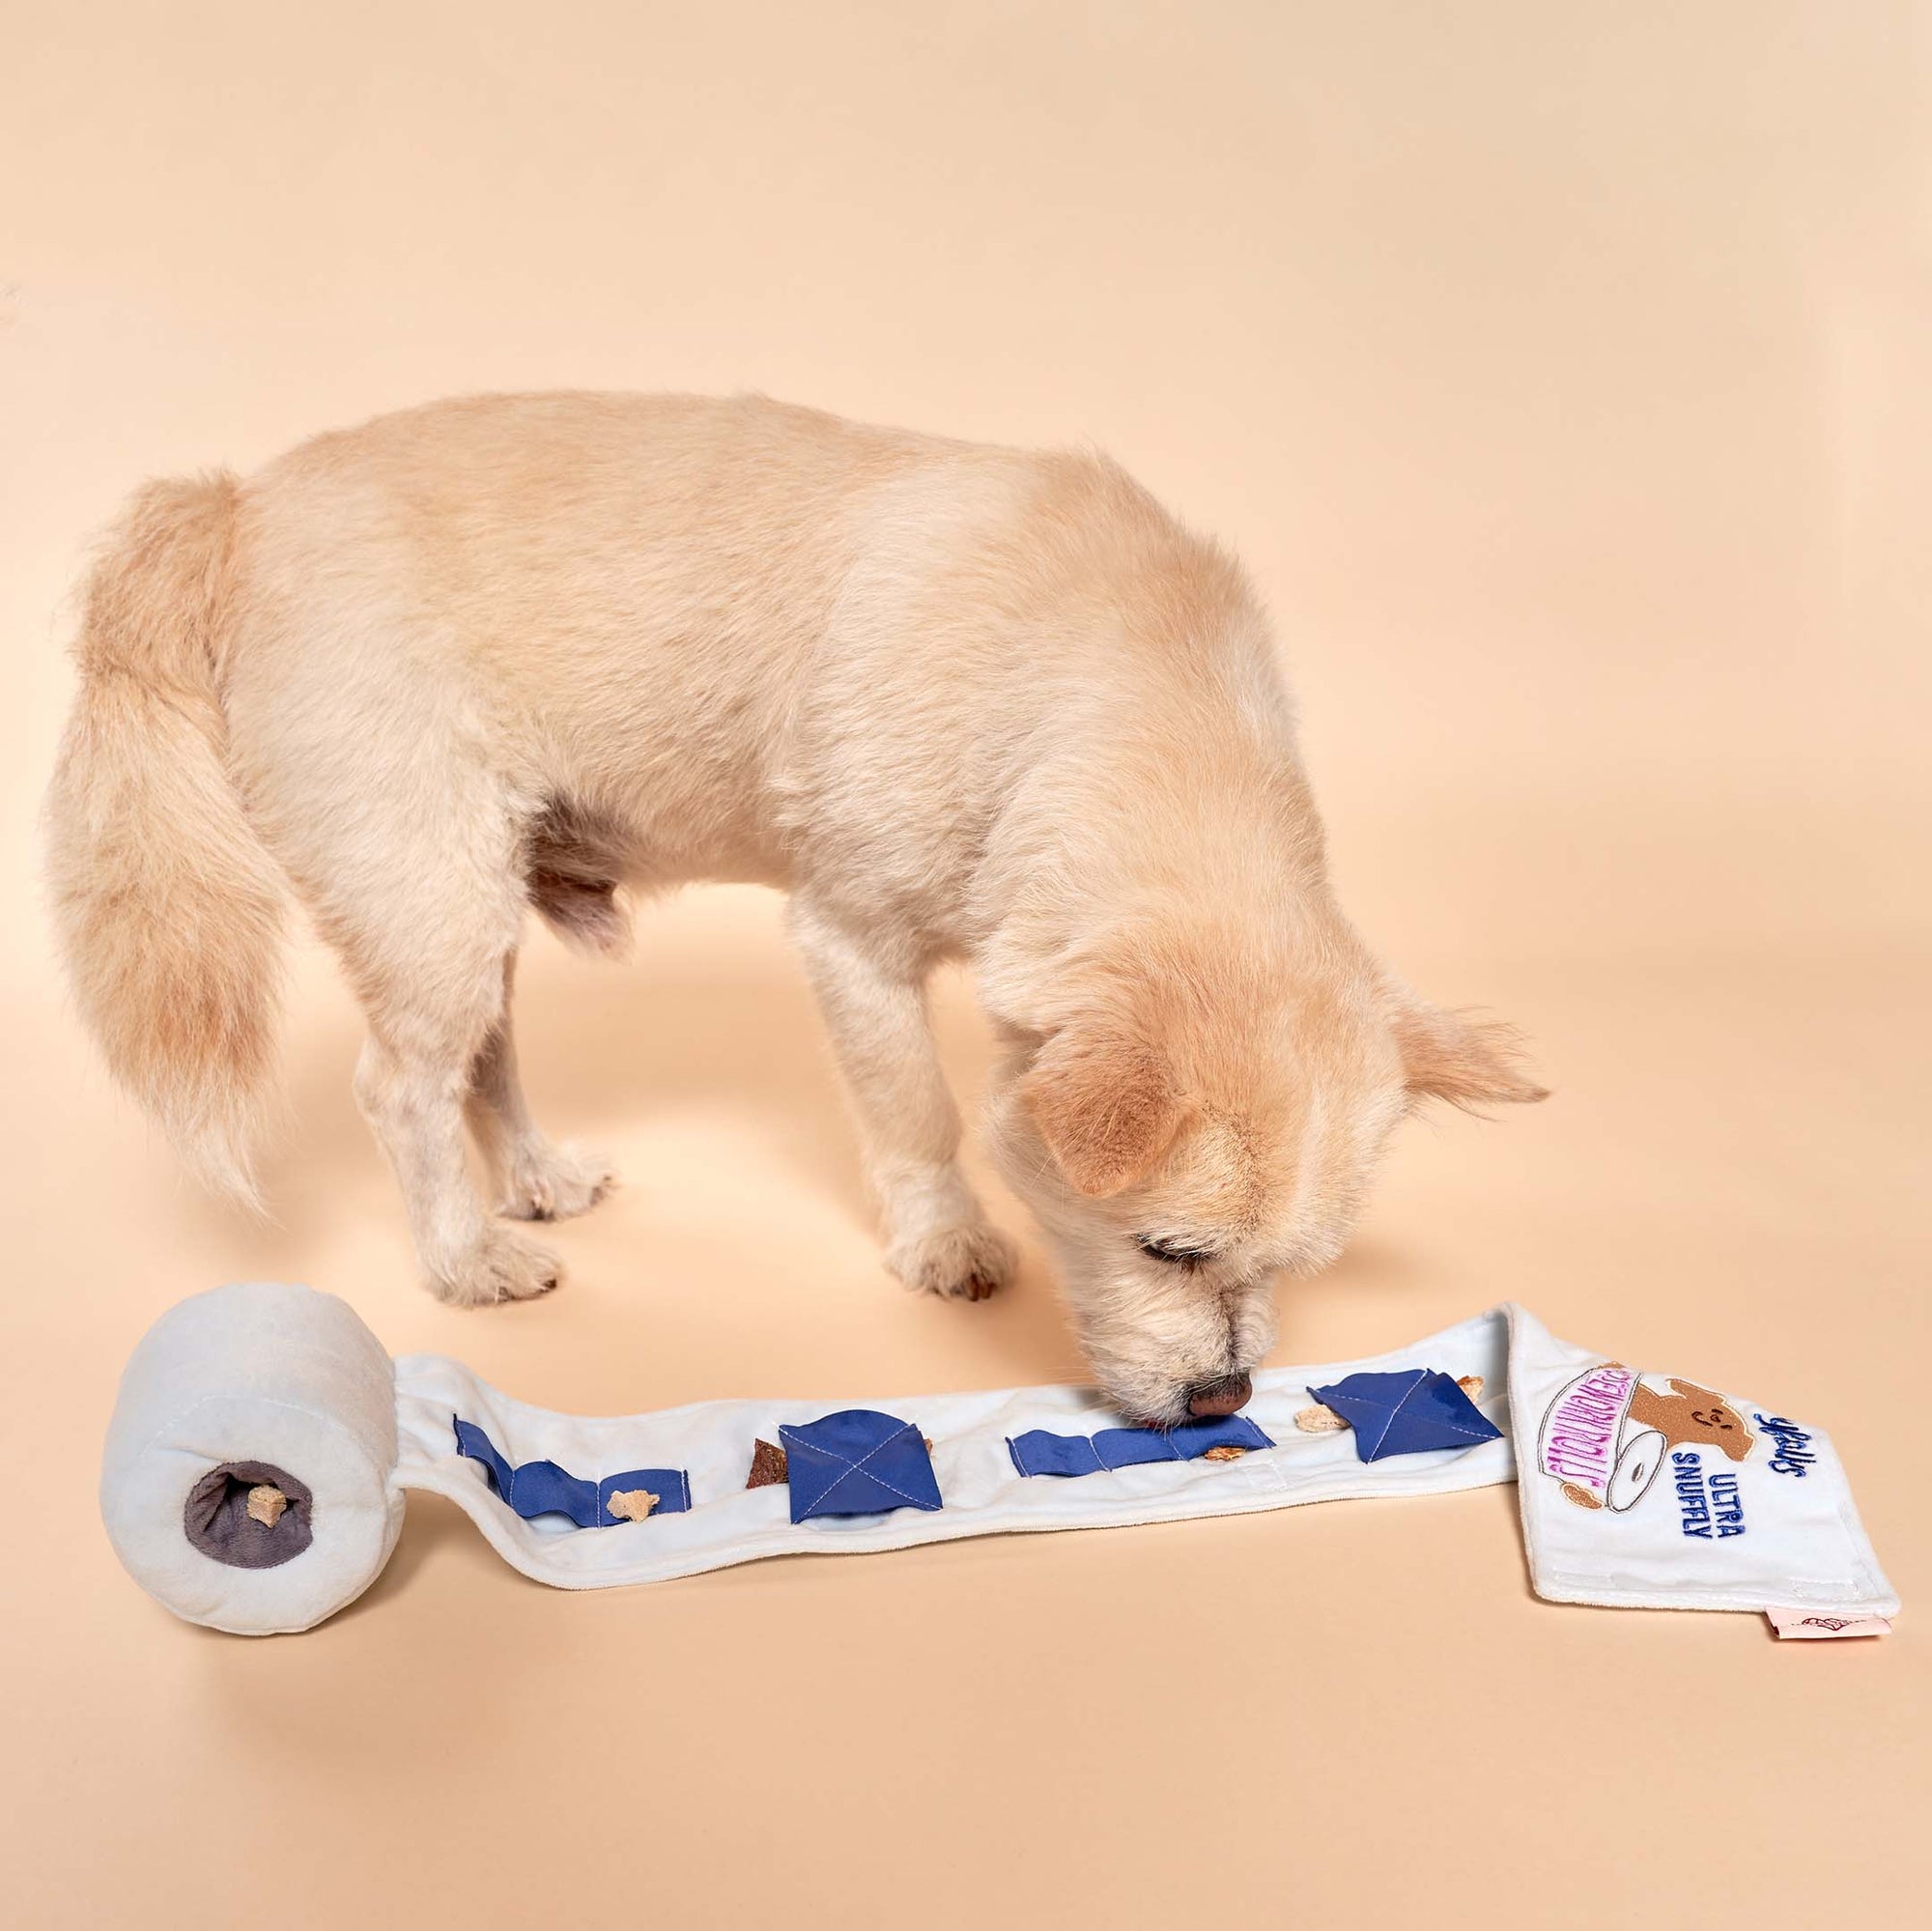 The image shows a light-colored dog engaging with a snuffle mat toy, which is laid out on the floor. The mat is white with blue pockets and has "The Furryfolks" branding on it, indicating it's designed for pets to use their sense of smell to find treats. The dog appears to be sniffing or retrieving a treat from one of the pockets, demonstrating the mat's intended use. The beige background complements the scene, highlighting the interaction between the dog and the toy.